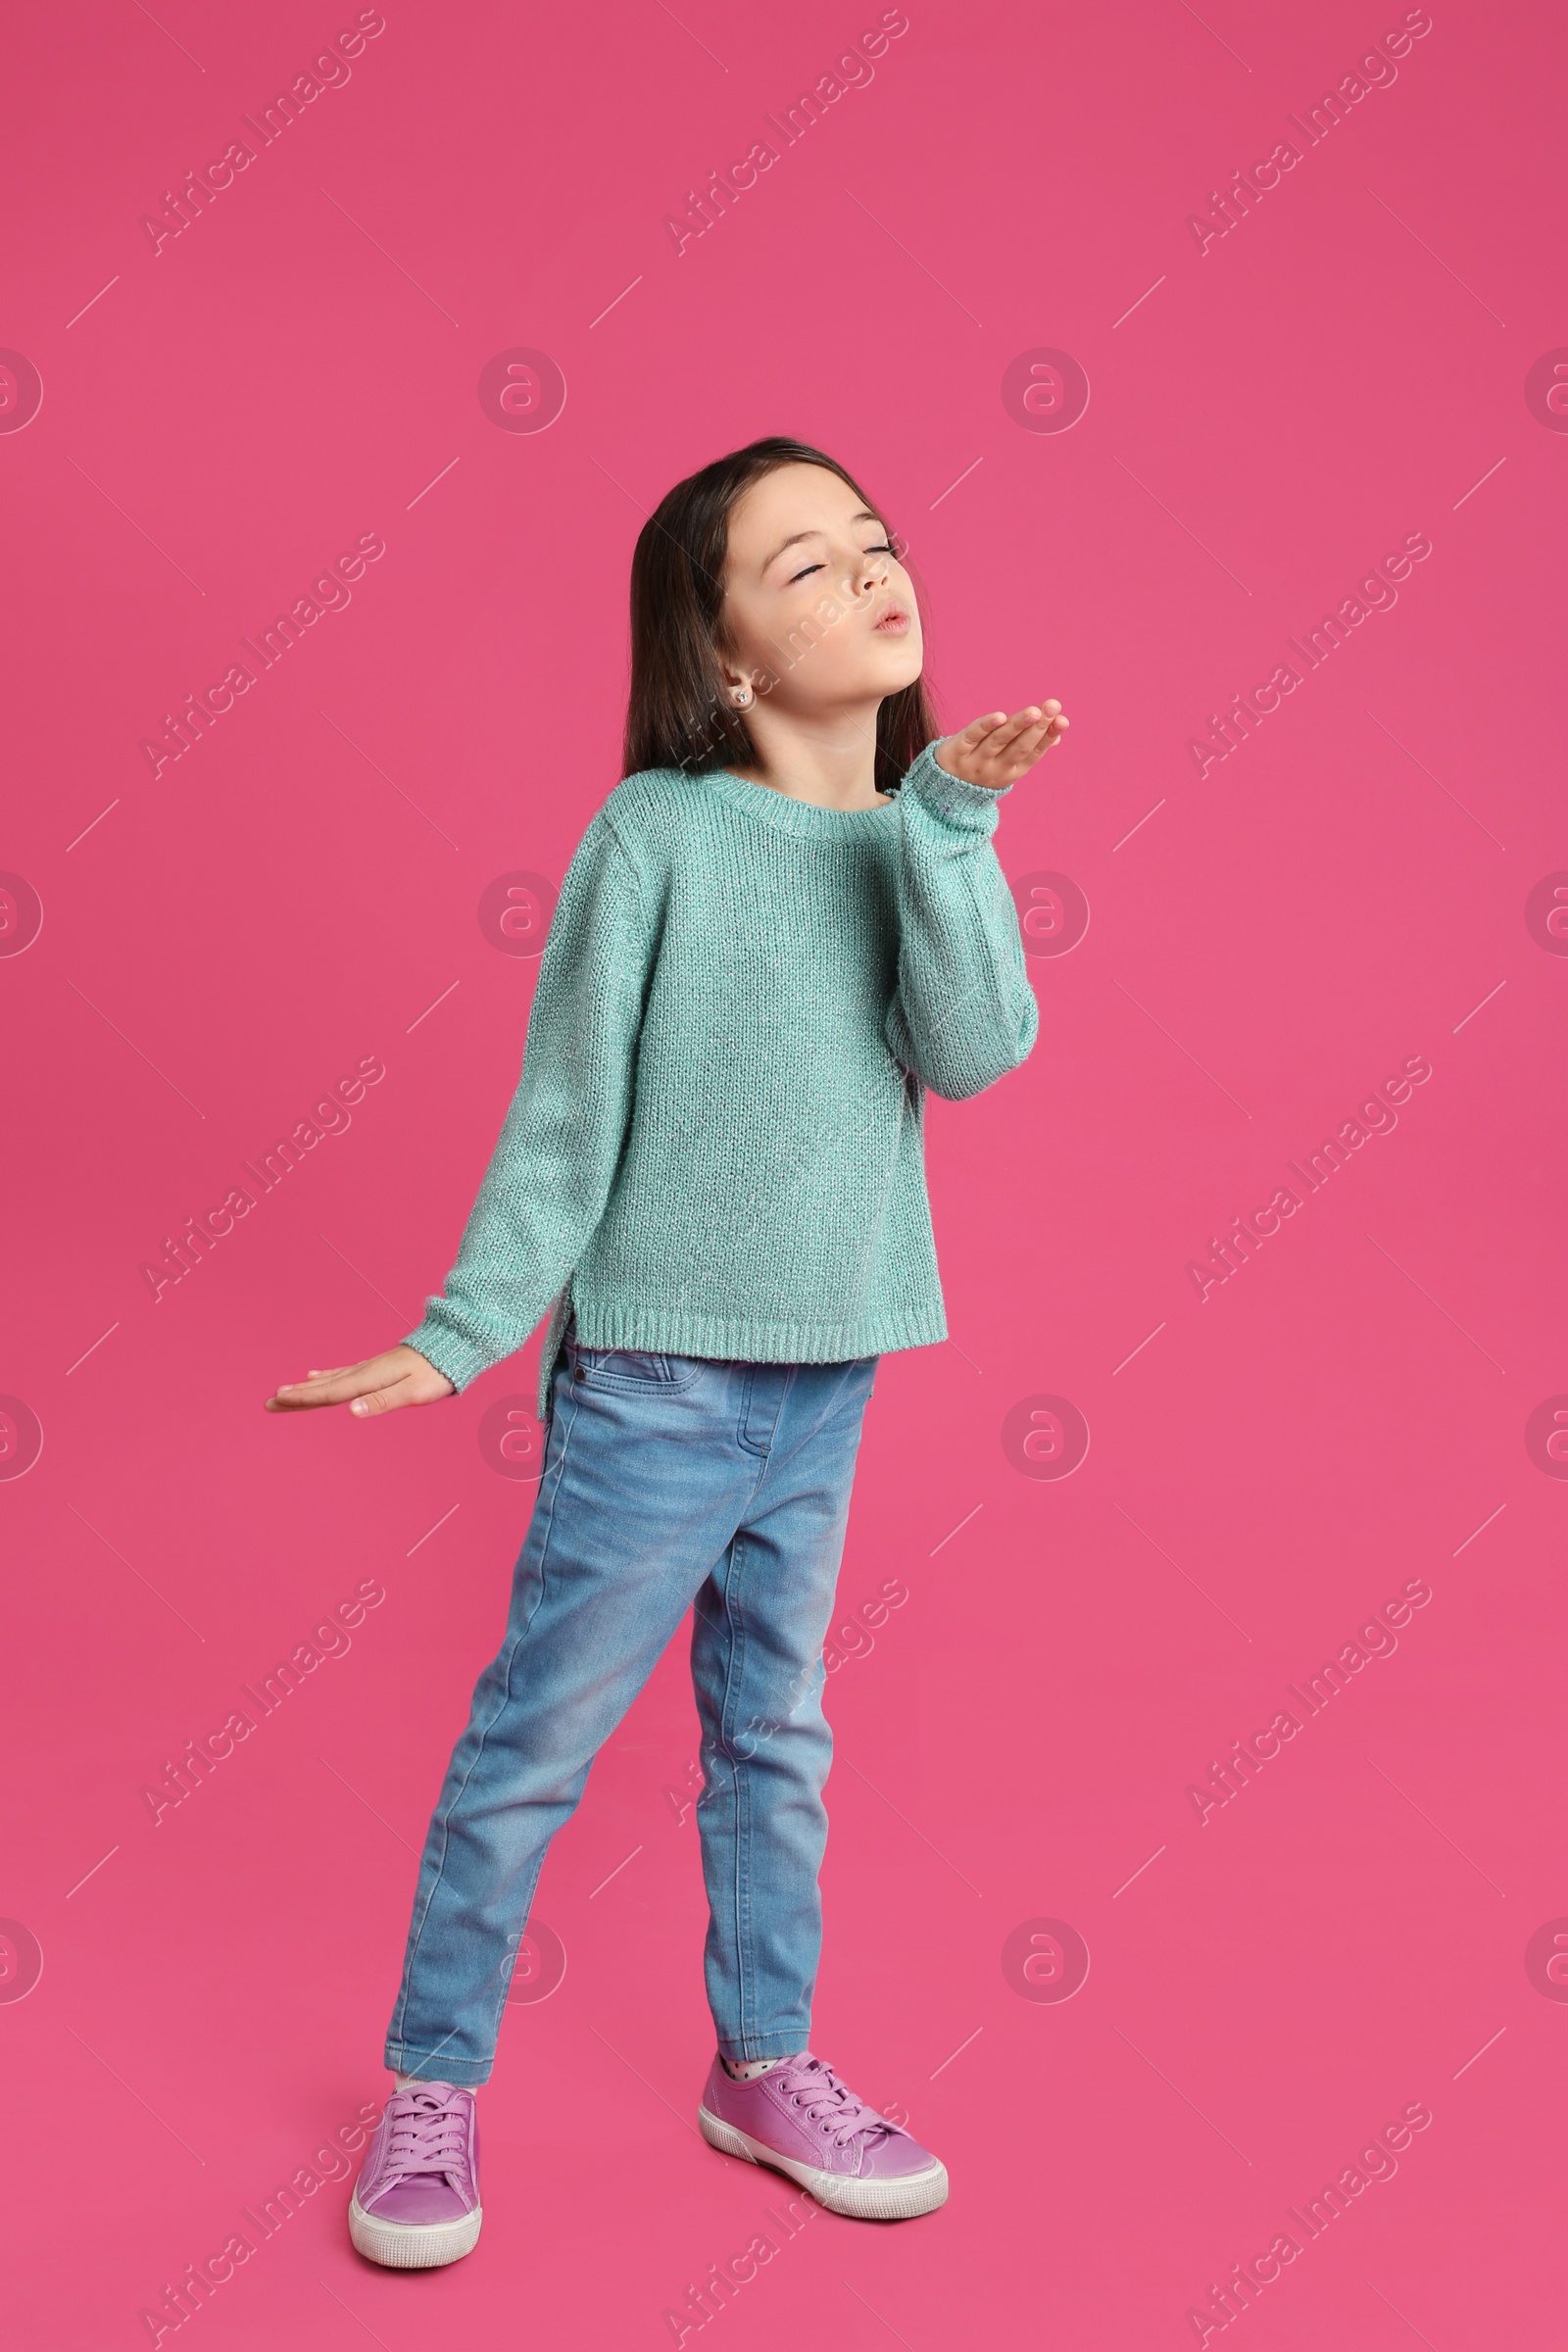 Photo of Cute little girl blowing air kiss on pink background